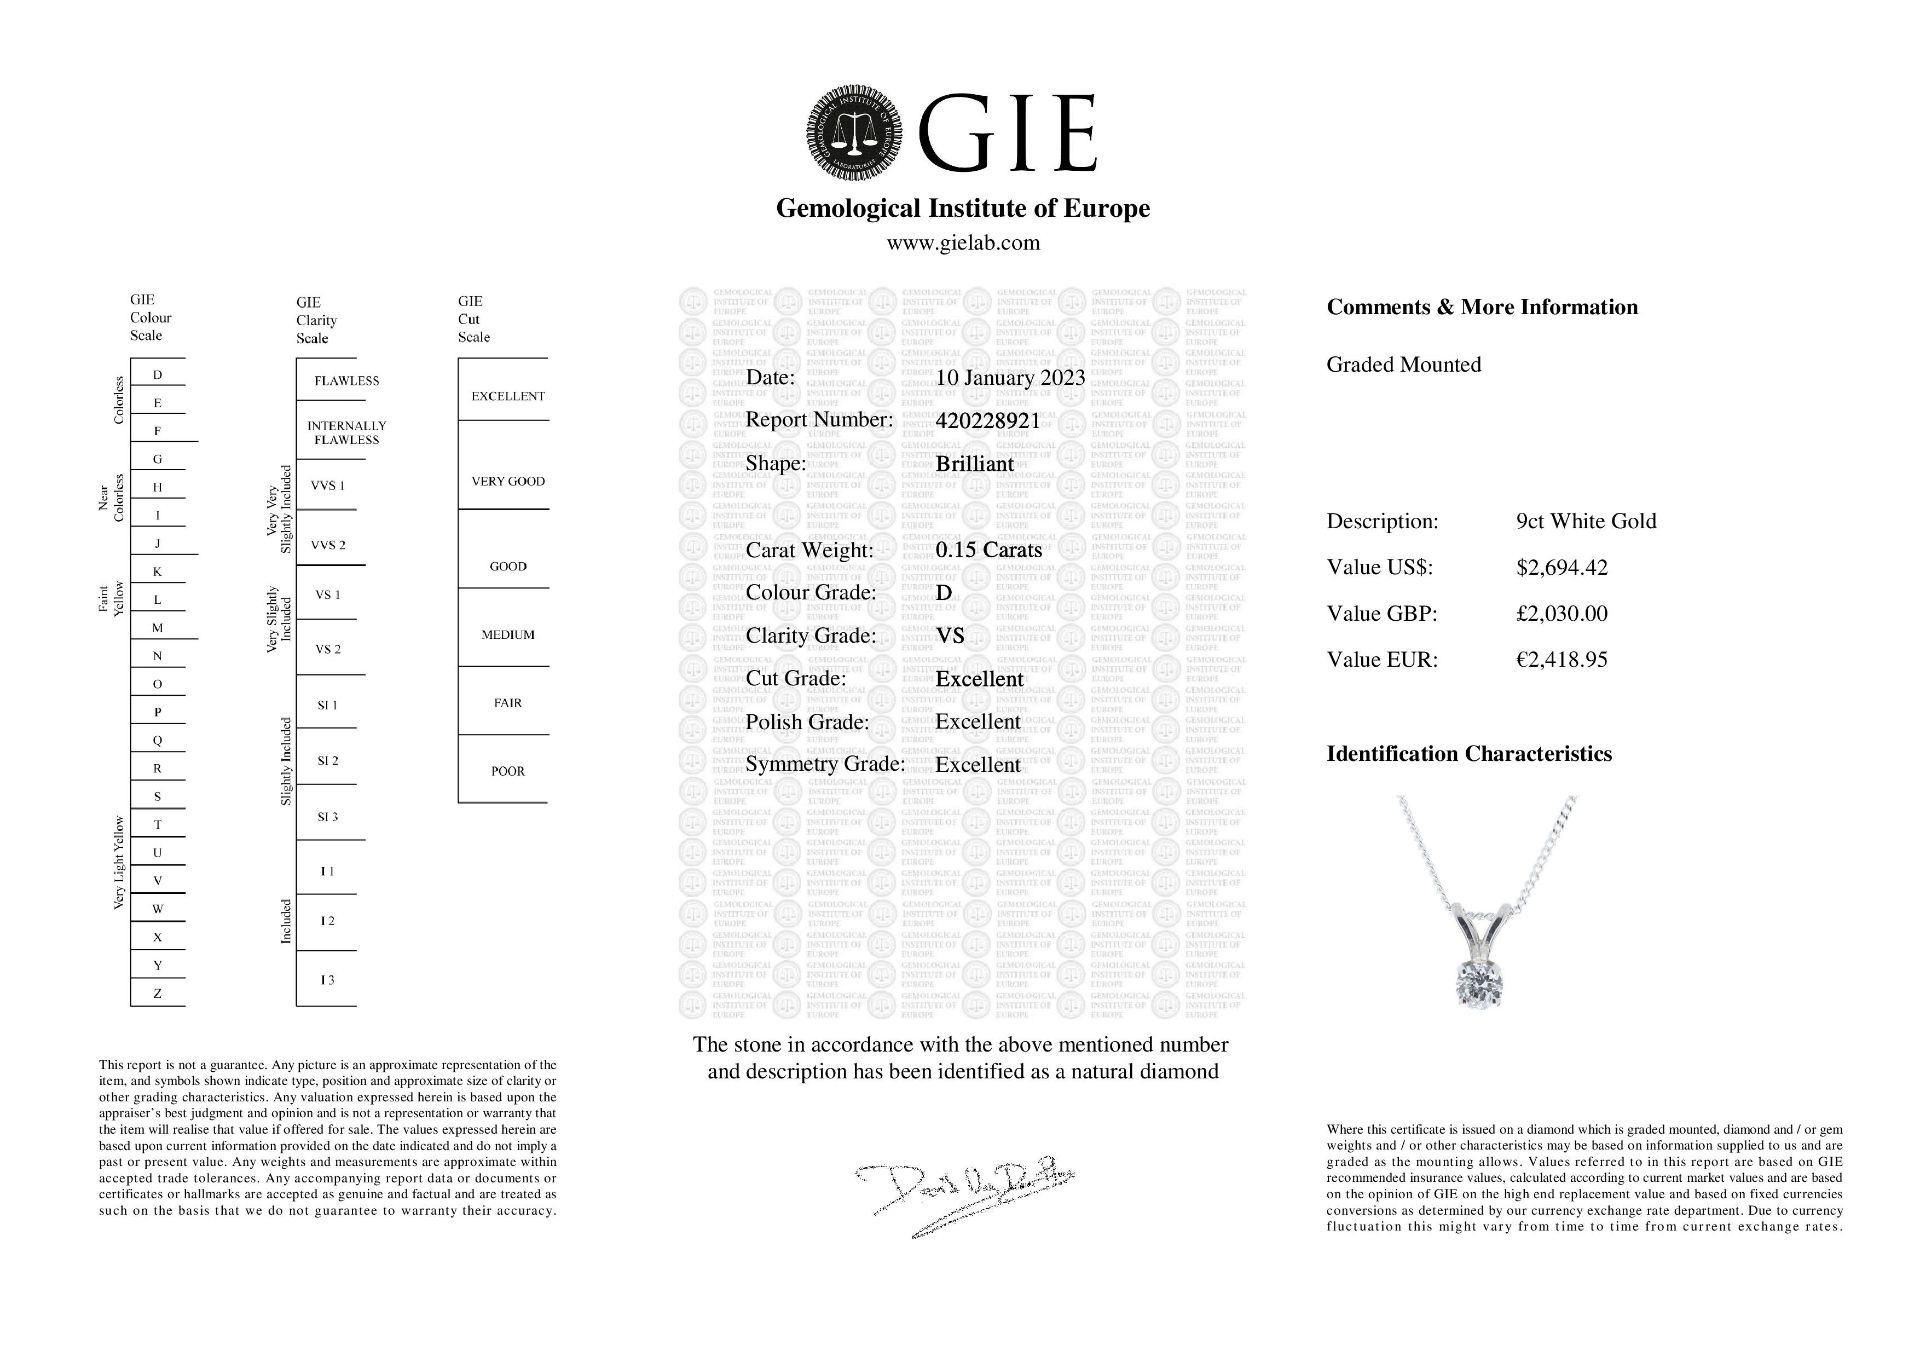 9ct White Gold Single Stone Claw Set Diamond Pendant 0.15 Carats - Valued By GIE £2,030.00 - A - Image 6 of 6